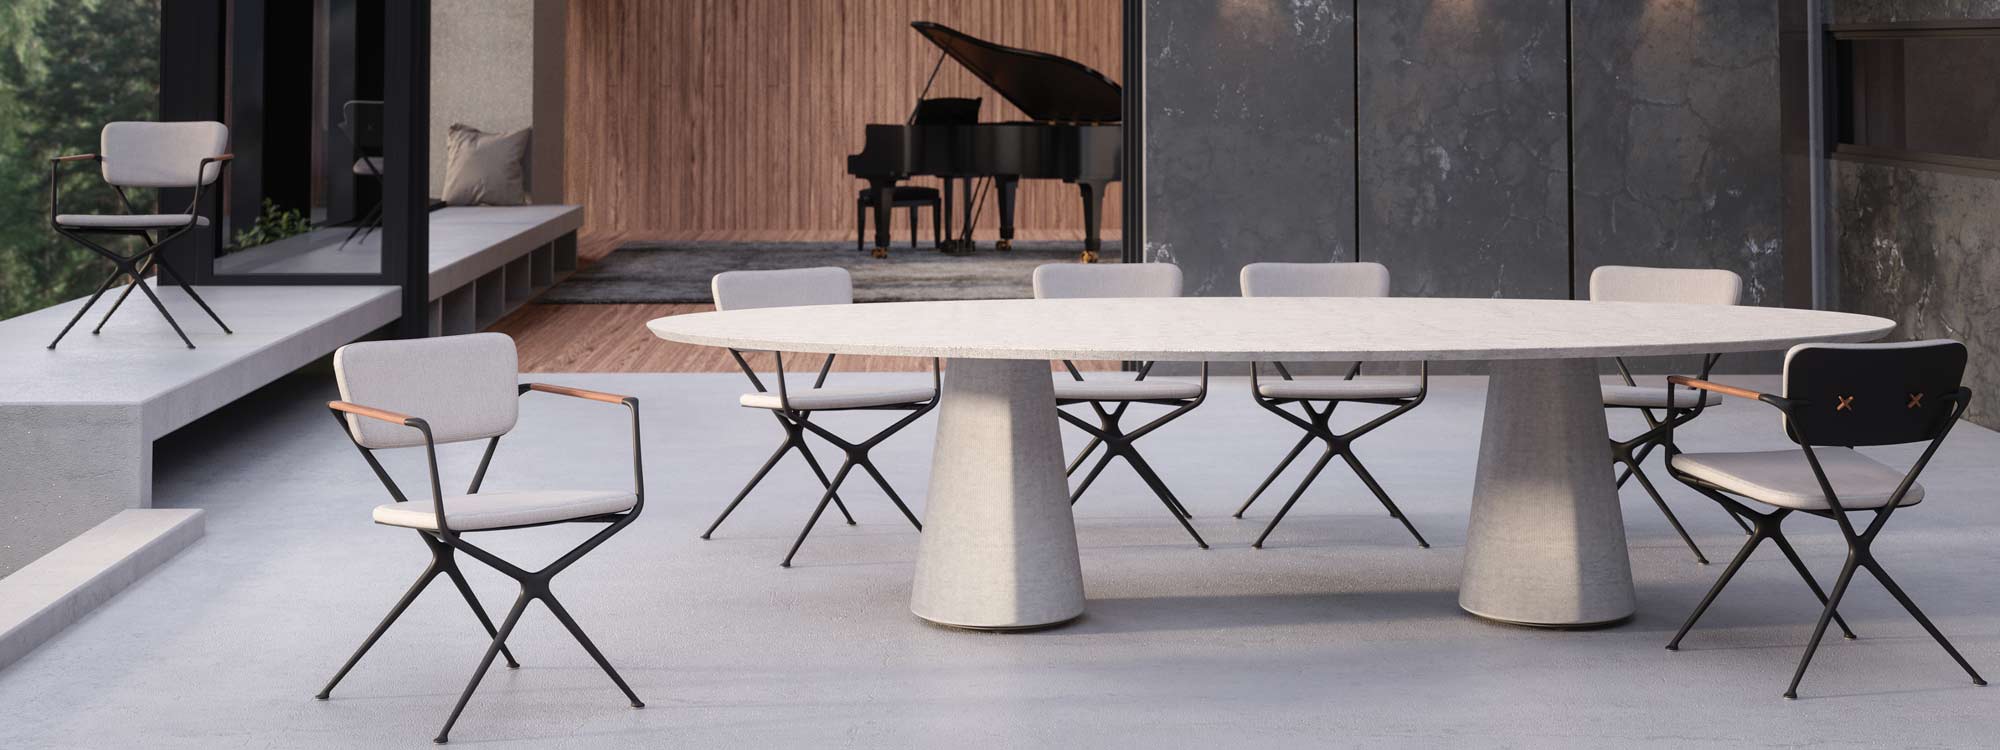 Image of Exes anthracite chairs and Conix concrete garden table by Royal Botania